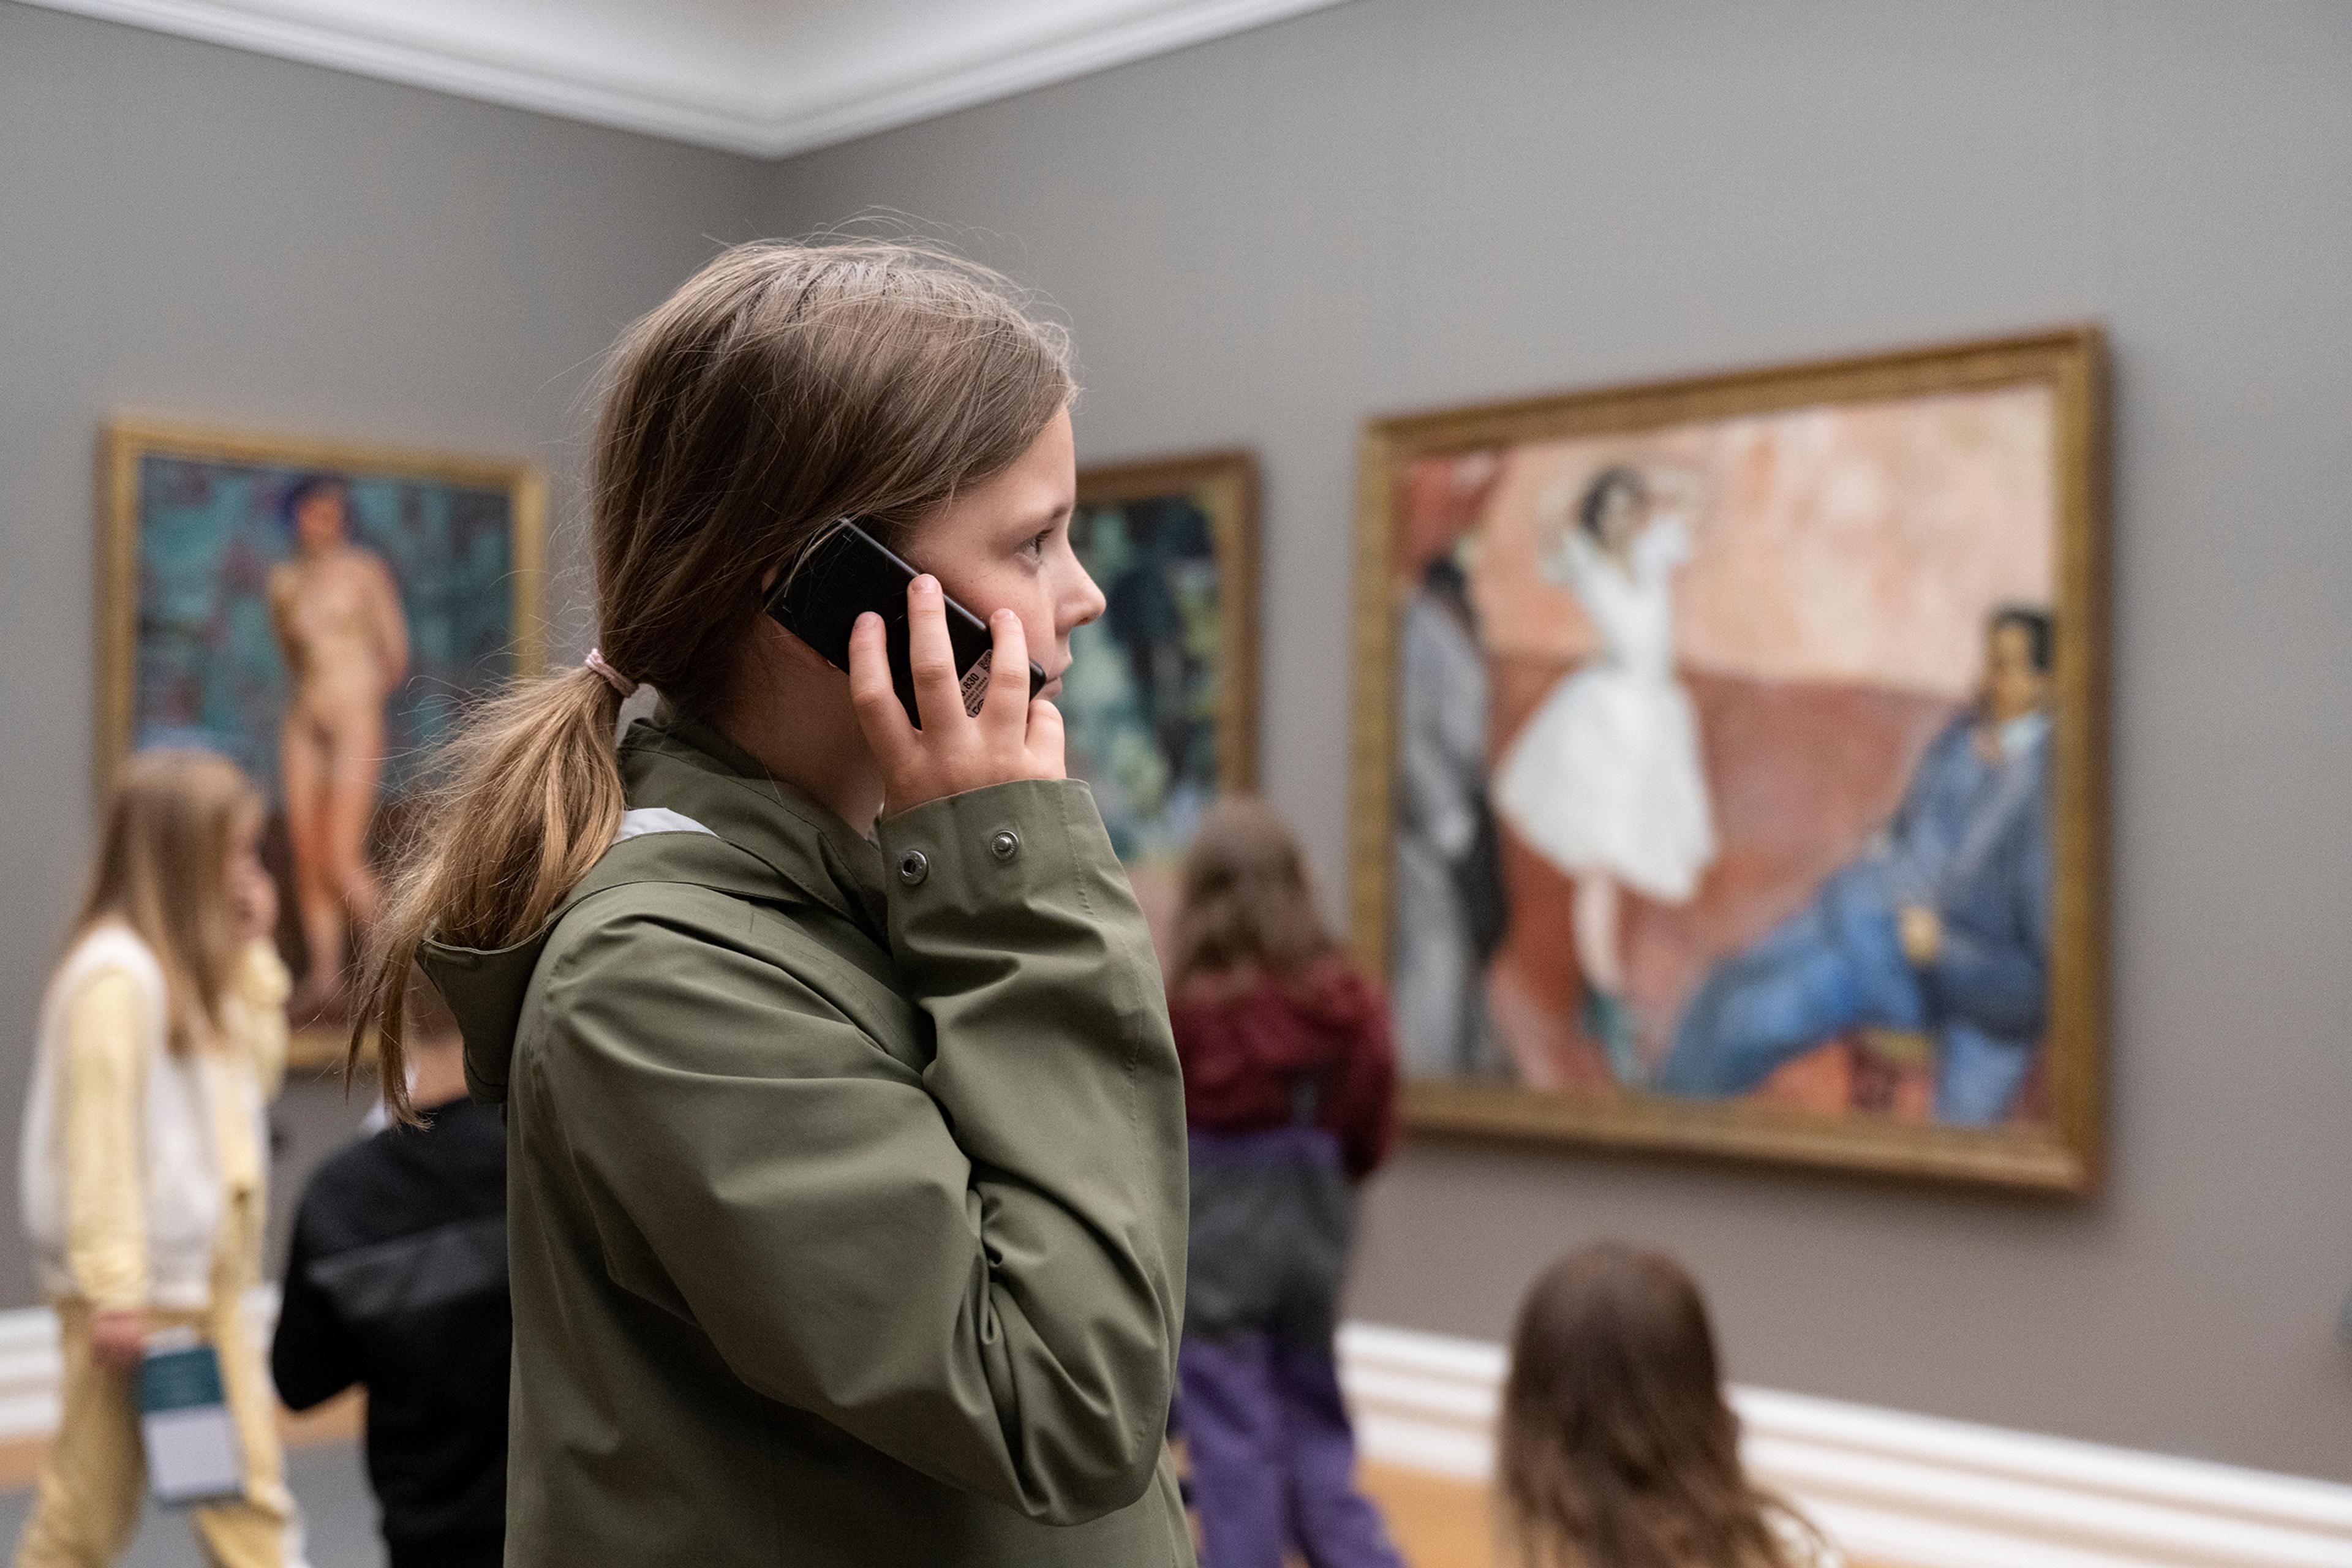 A young girl listening to an audioguide in the Rasmus Meyer museum.